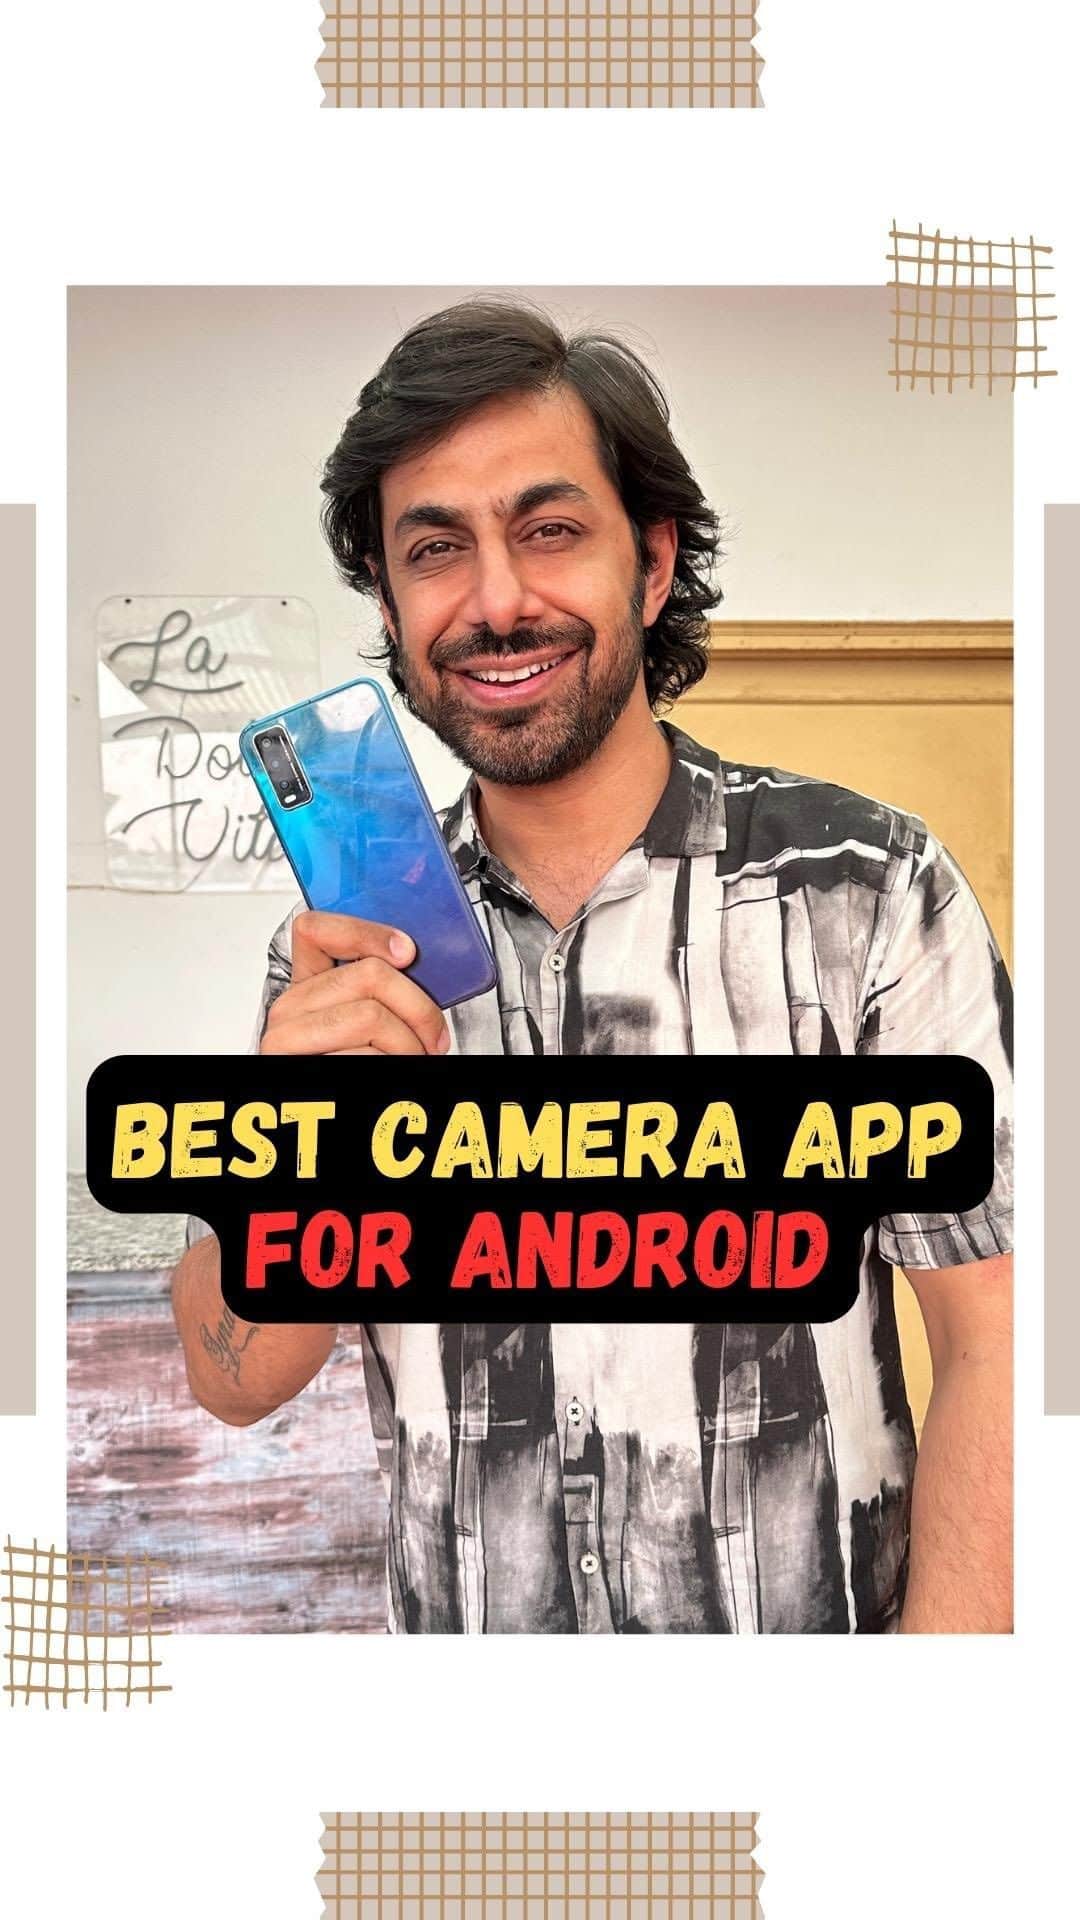 Praveen Bhatのインスタグラム：「For my android phone users - one of the most imp tips to capture quality videos . Have you tried this app before ?? Comment below    Follow @praveenbhat for daily tips and tricks」